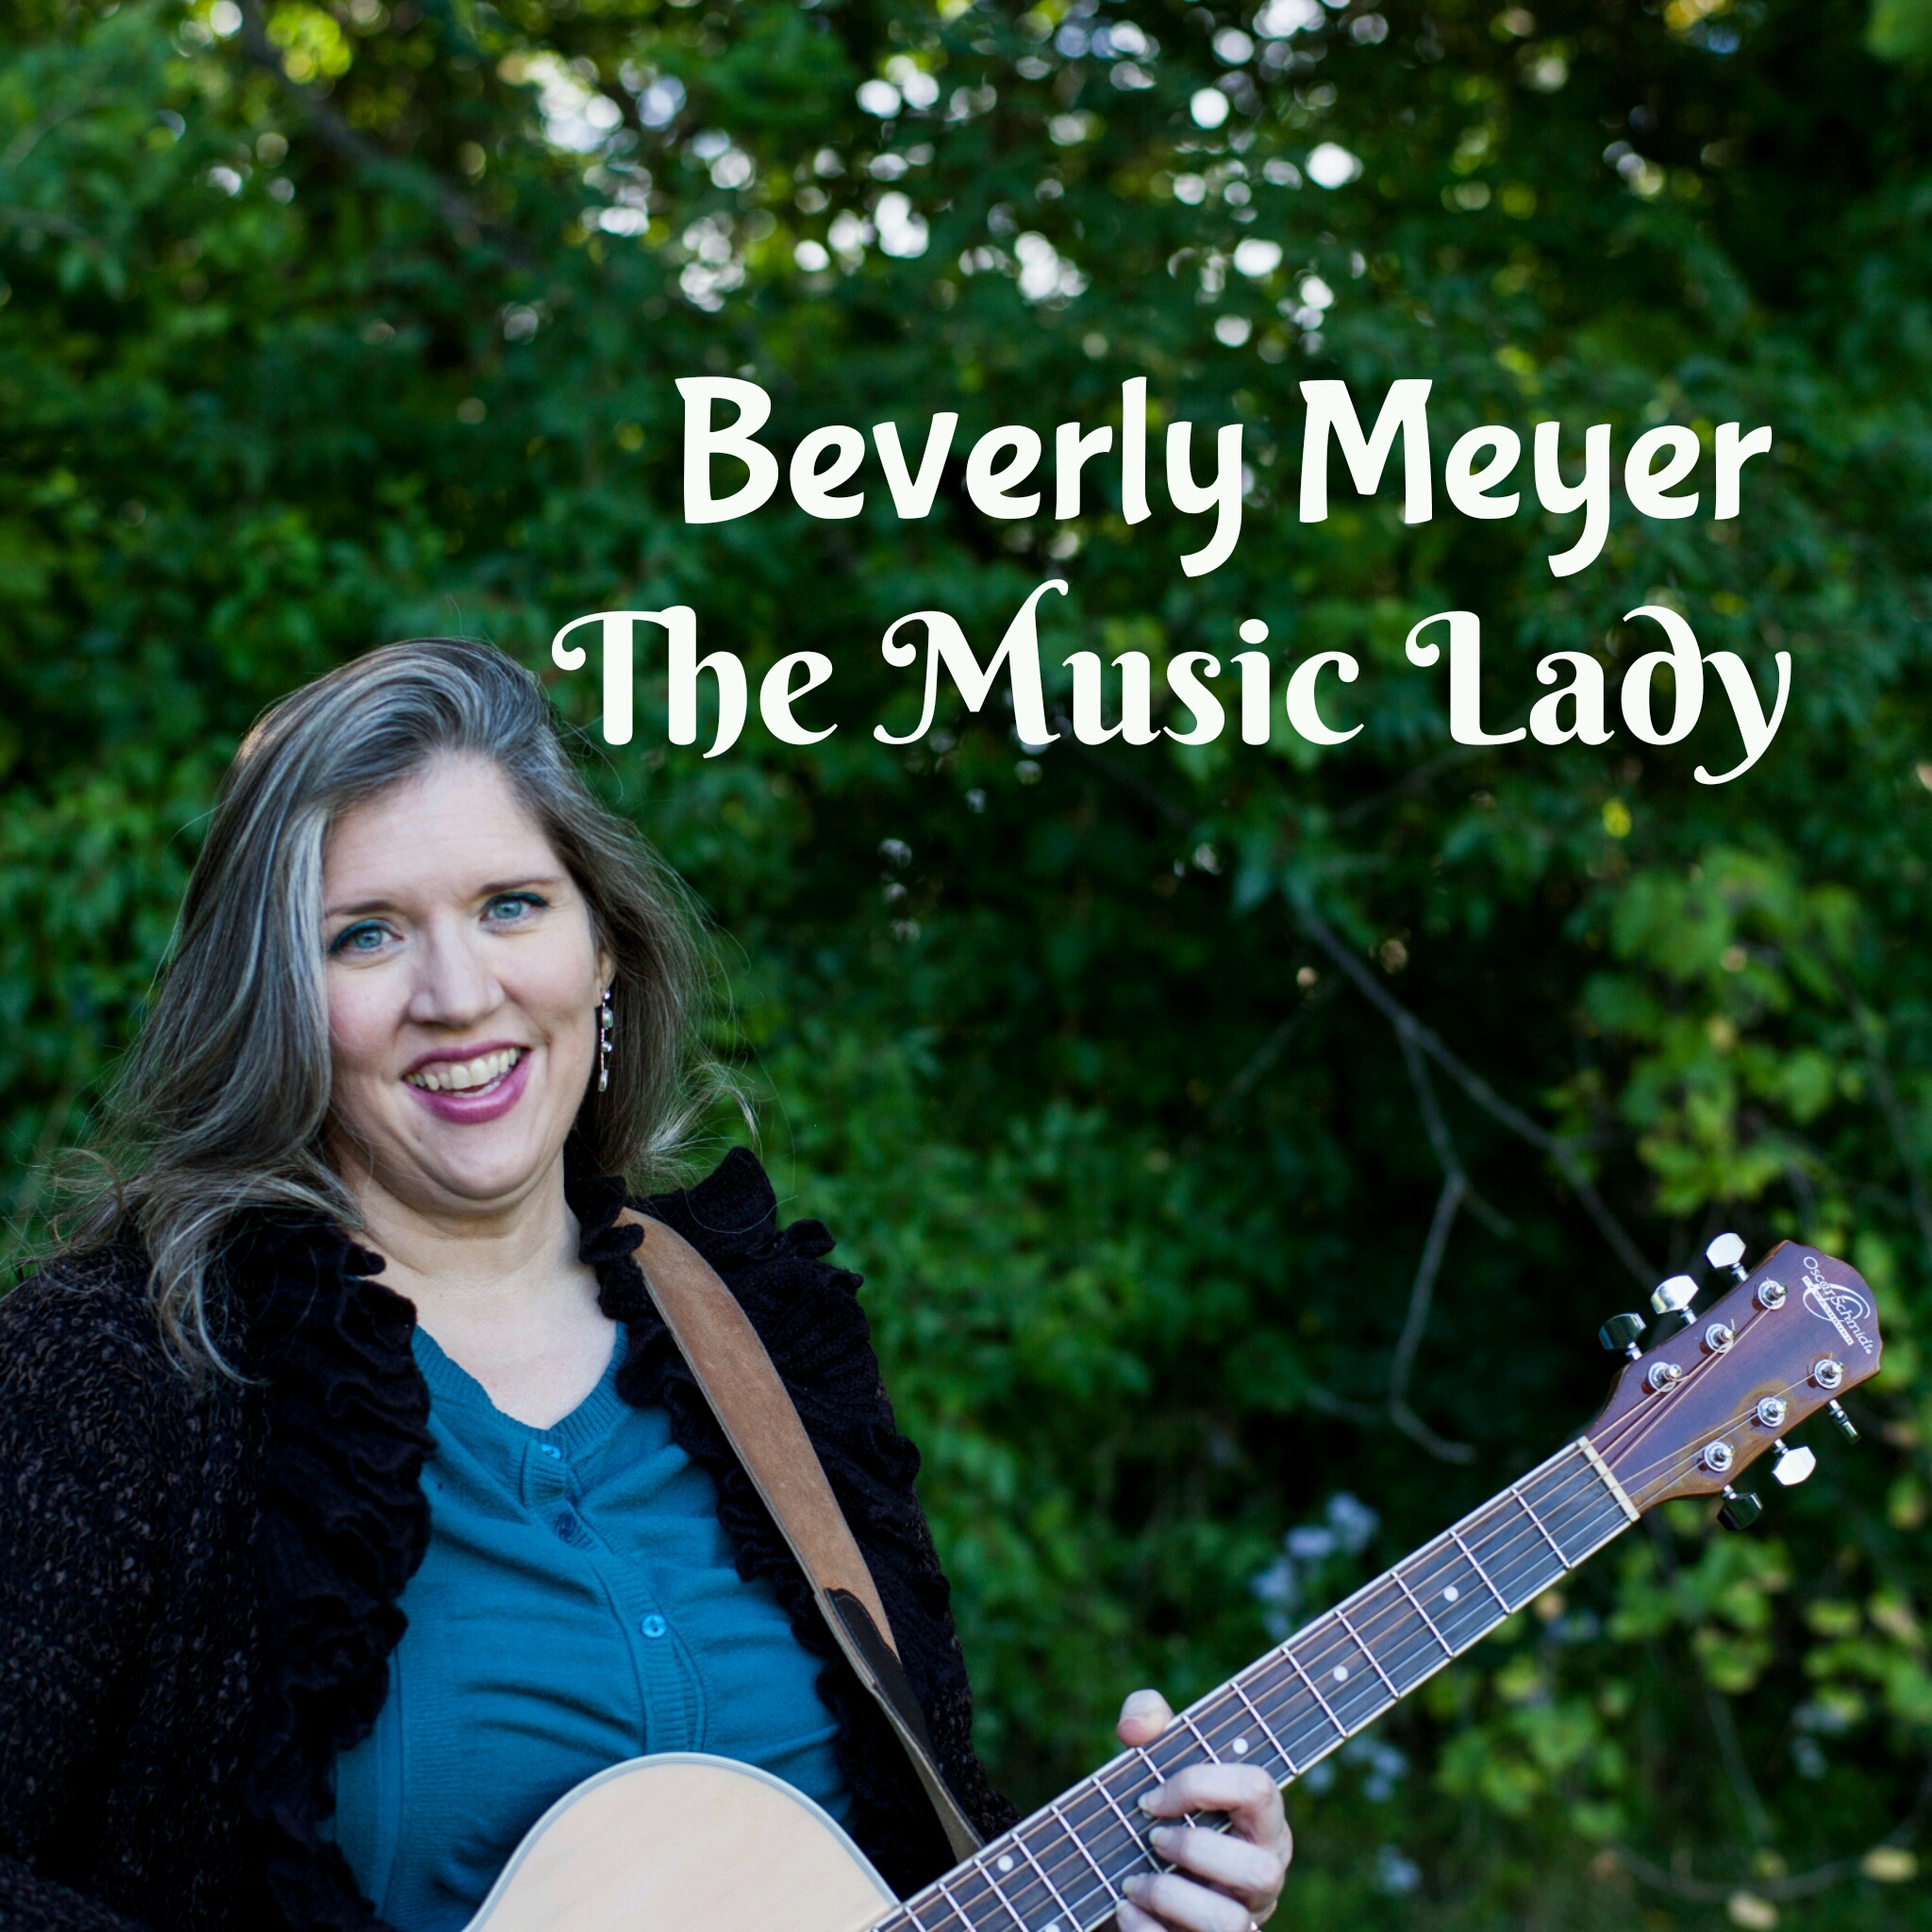 The Music Lady, Beverly Meyer, with her guitar